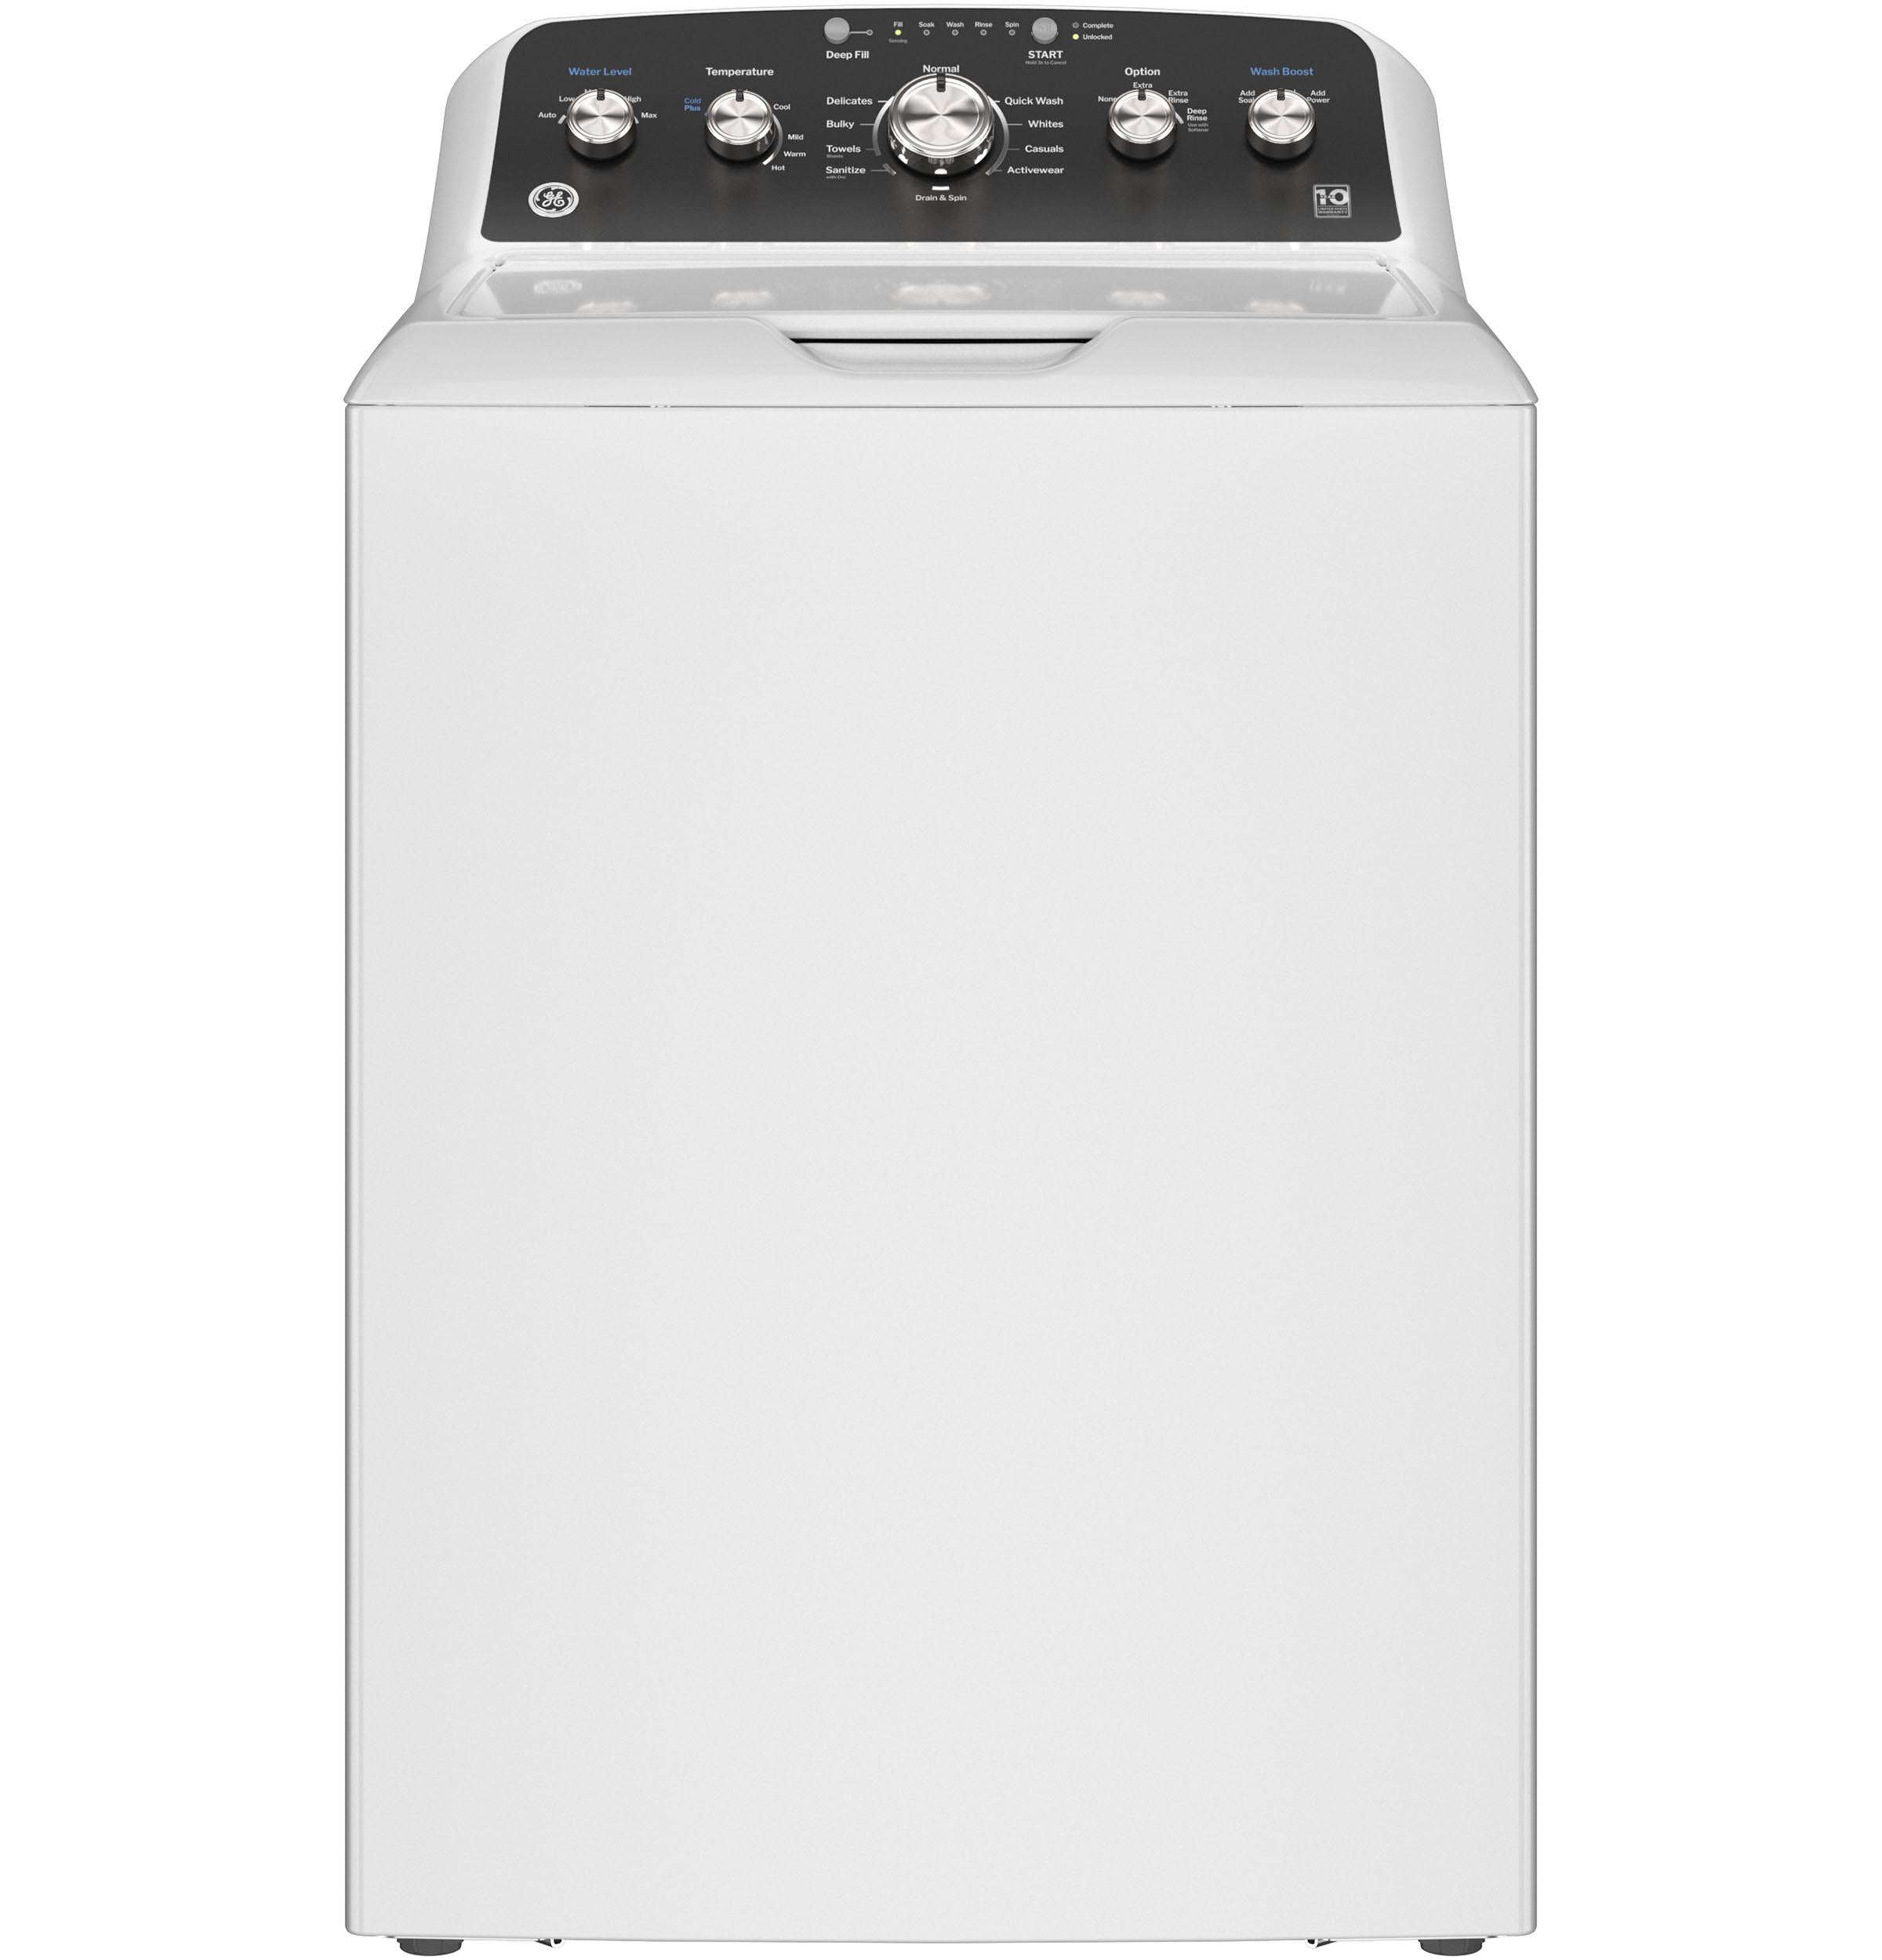 GE® 4.6 cu. ft. Capacity Washer with Stainless Steel